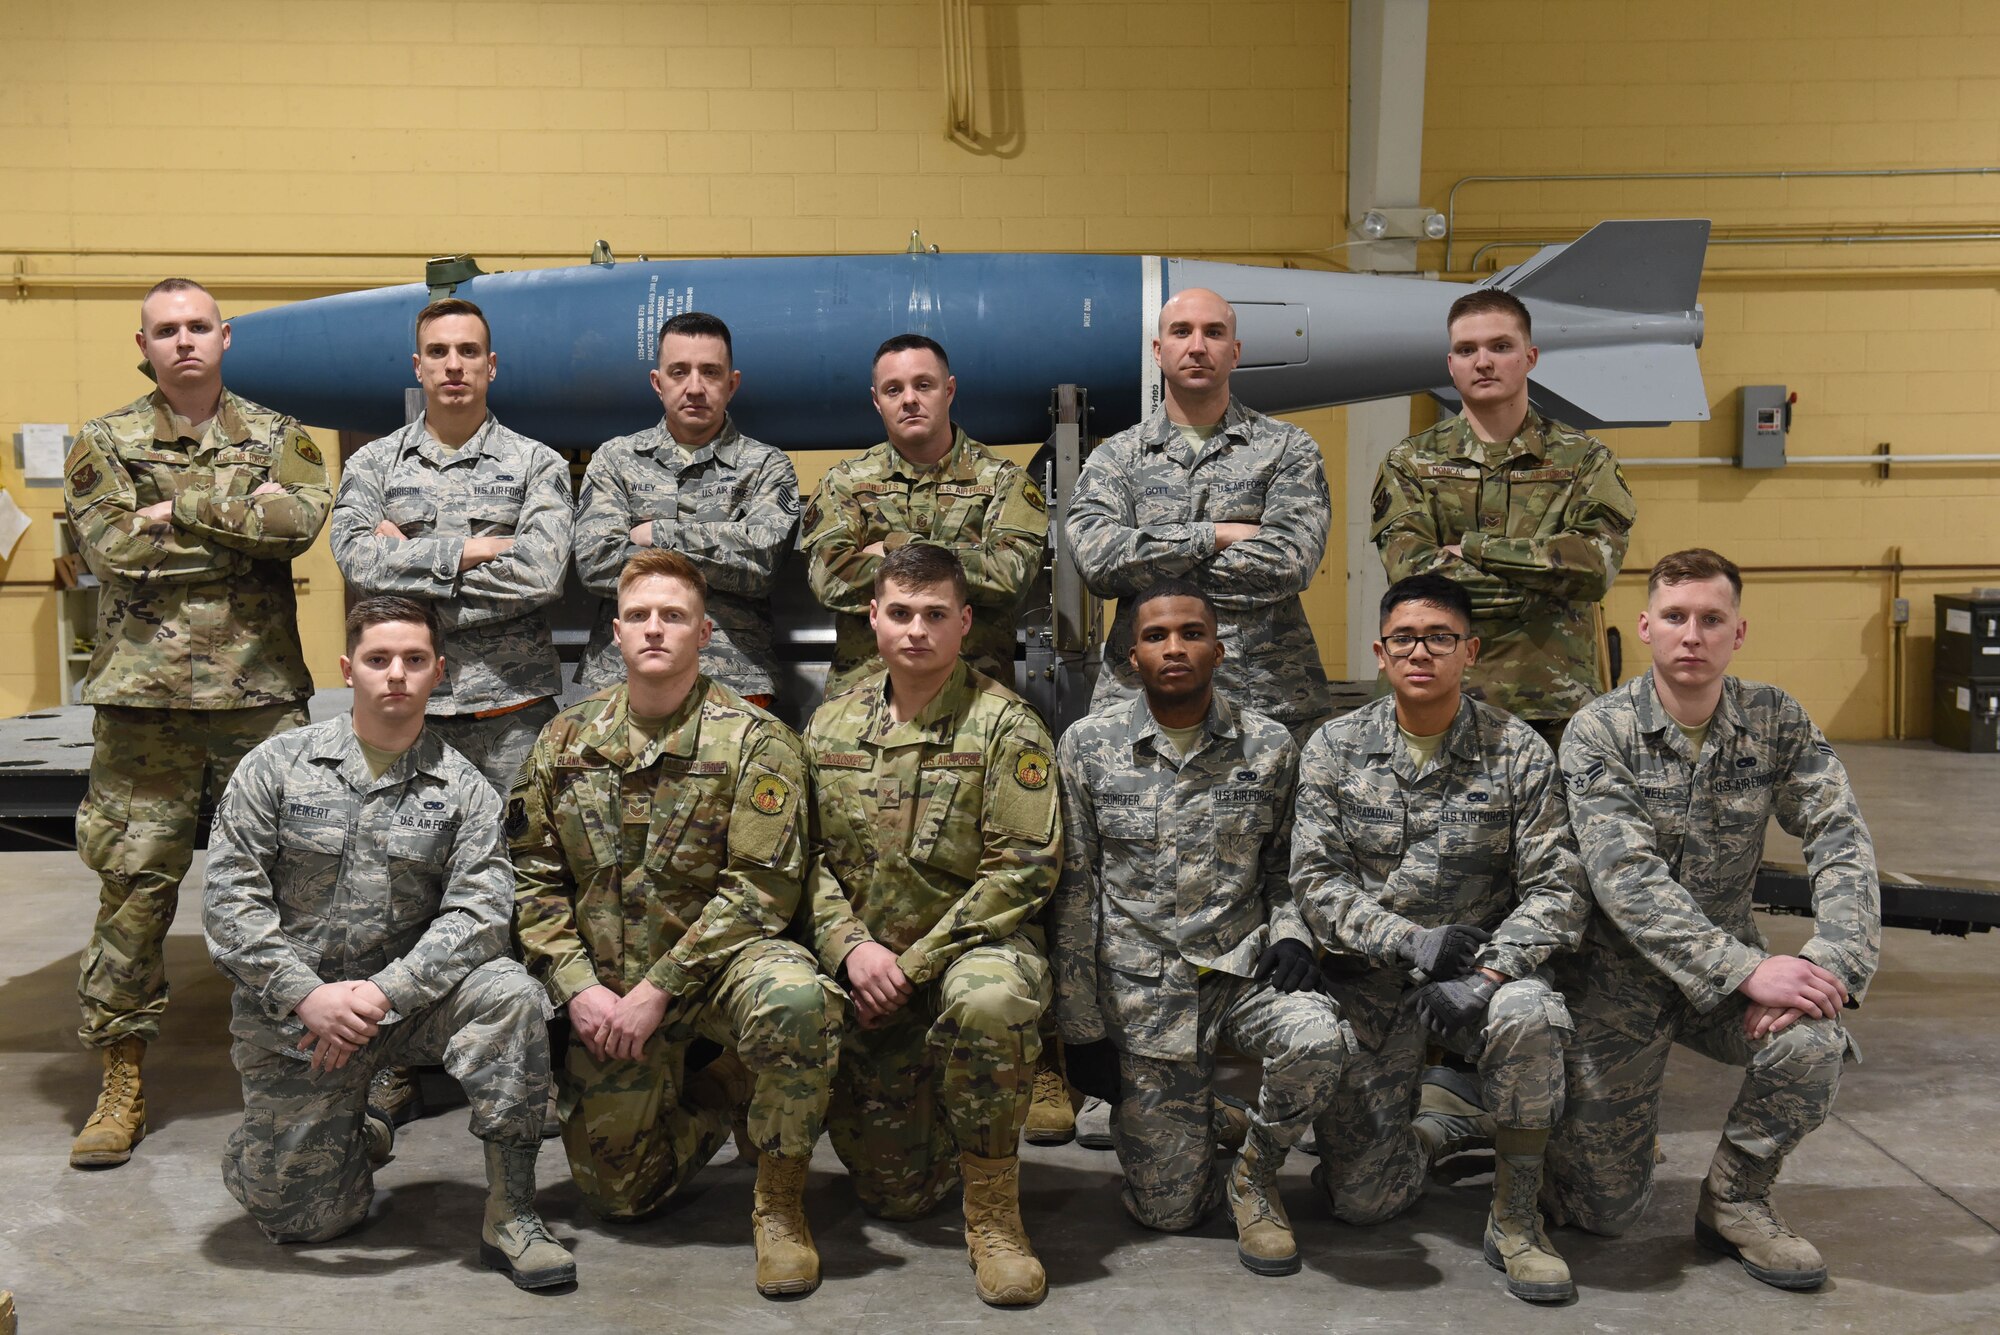 A 28th Munitions Squadron team won the Air Force Combat Operations Competition for U.S. Air Force Global Strike Command on Feb. 19, 2019. The team, assigned to Ellsworth Air Force Base, S.D., will move on compete at the Air force-level in May. The competition is used to determine the best of the best in munitions operations. (U.S. Air Force photo by Airman John Ennis)